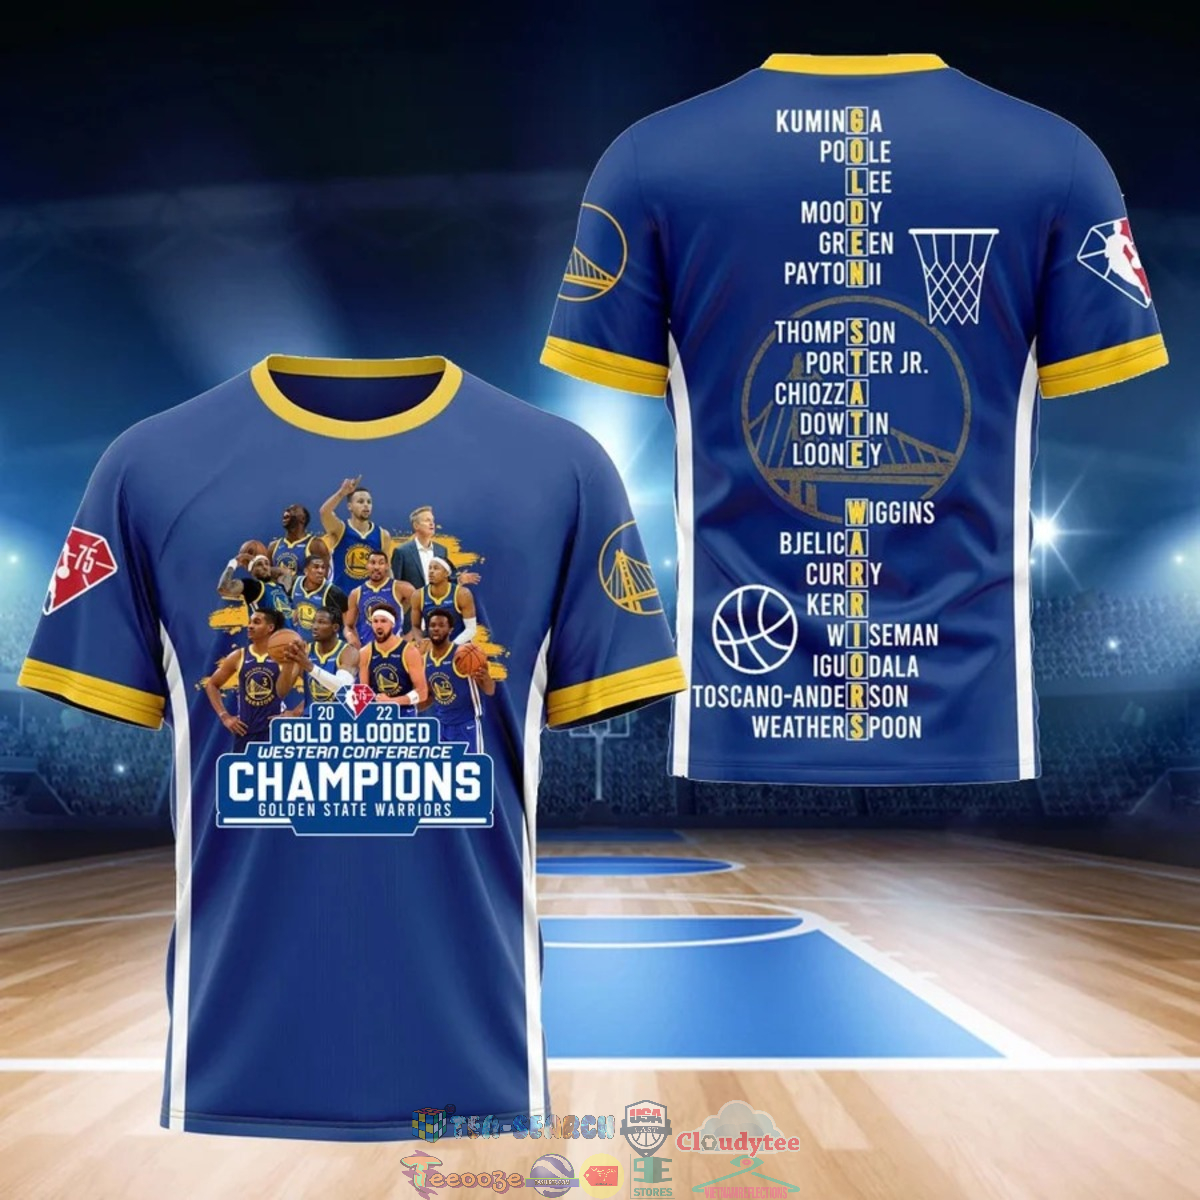 2022 Gold Blooded Western Conference Champions Golden State Warriors Blue 3D Shirt